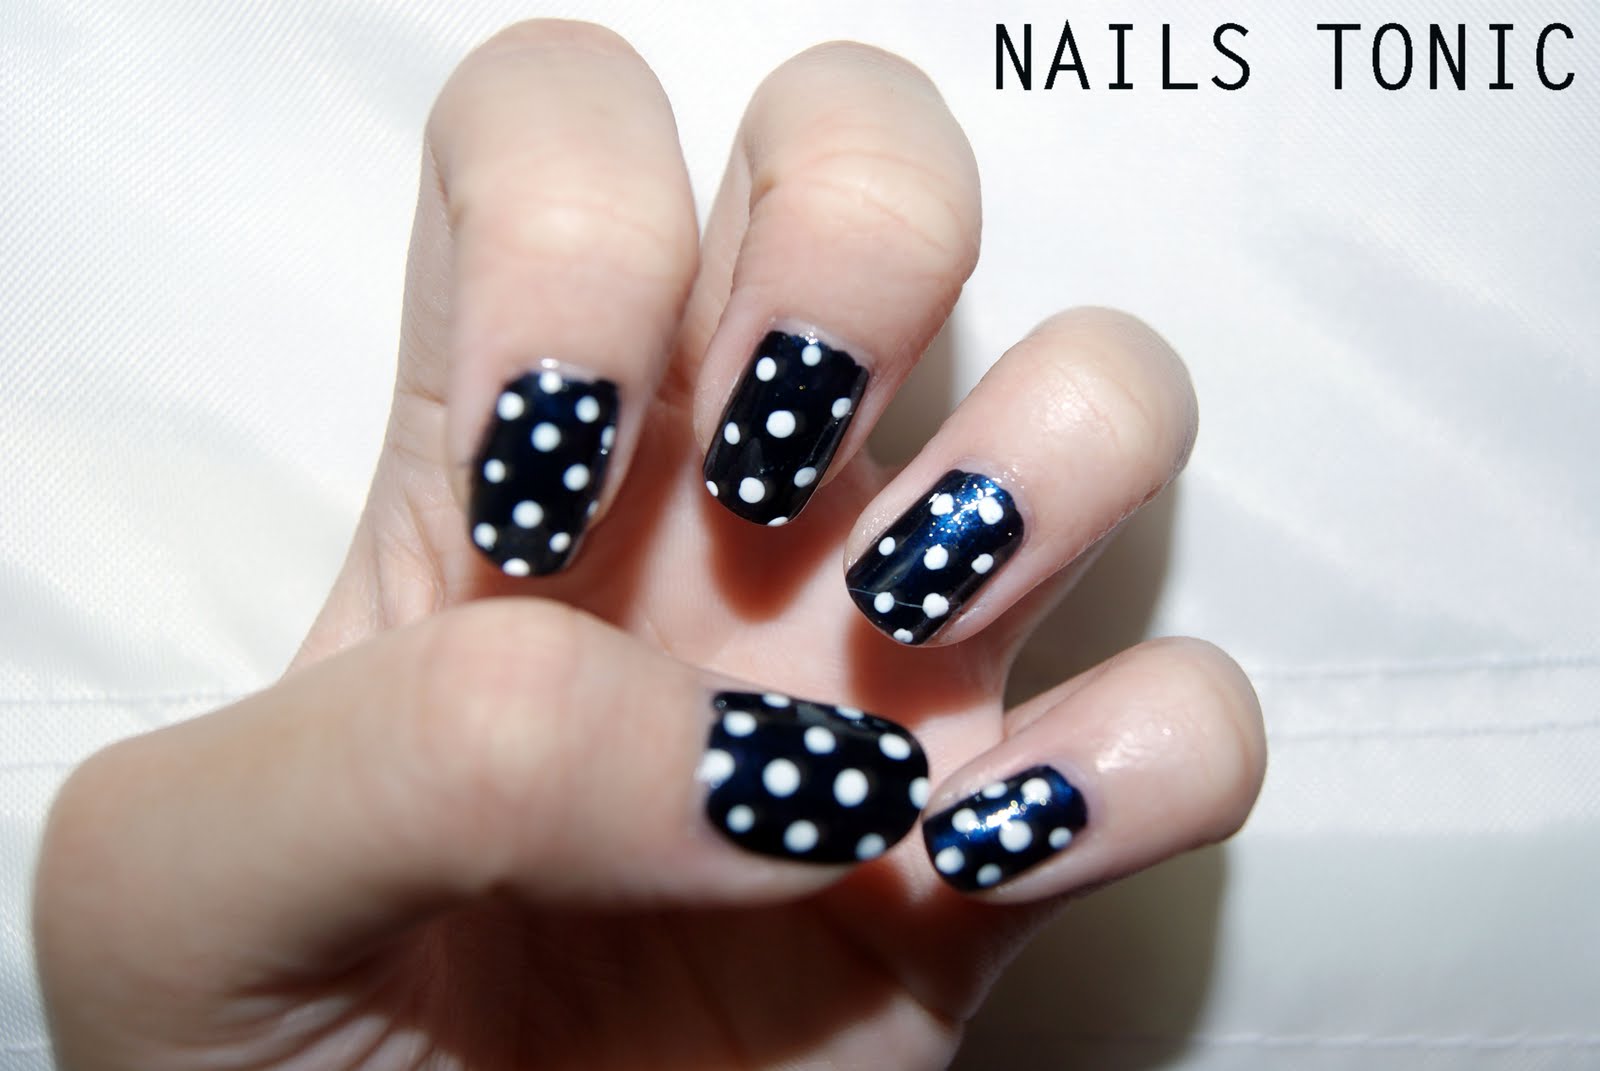 Dark blue and white striped nails - wide 4